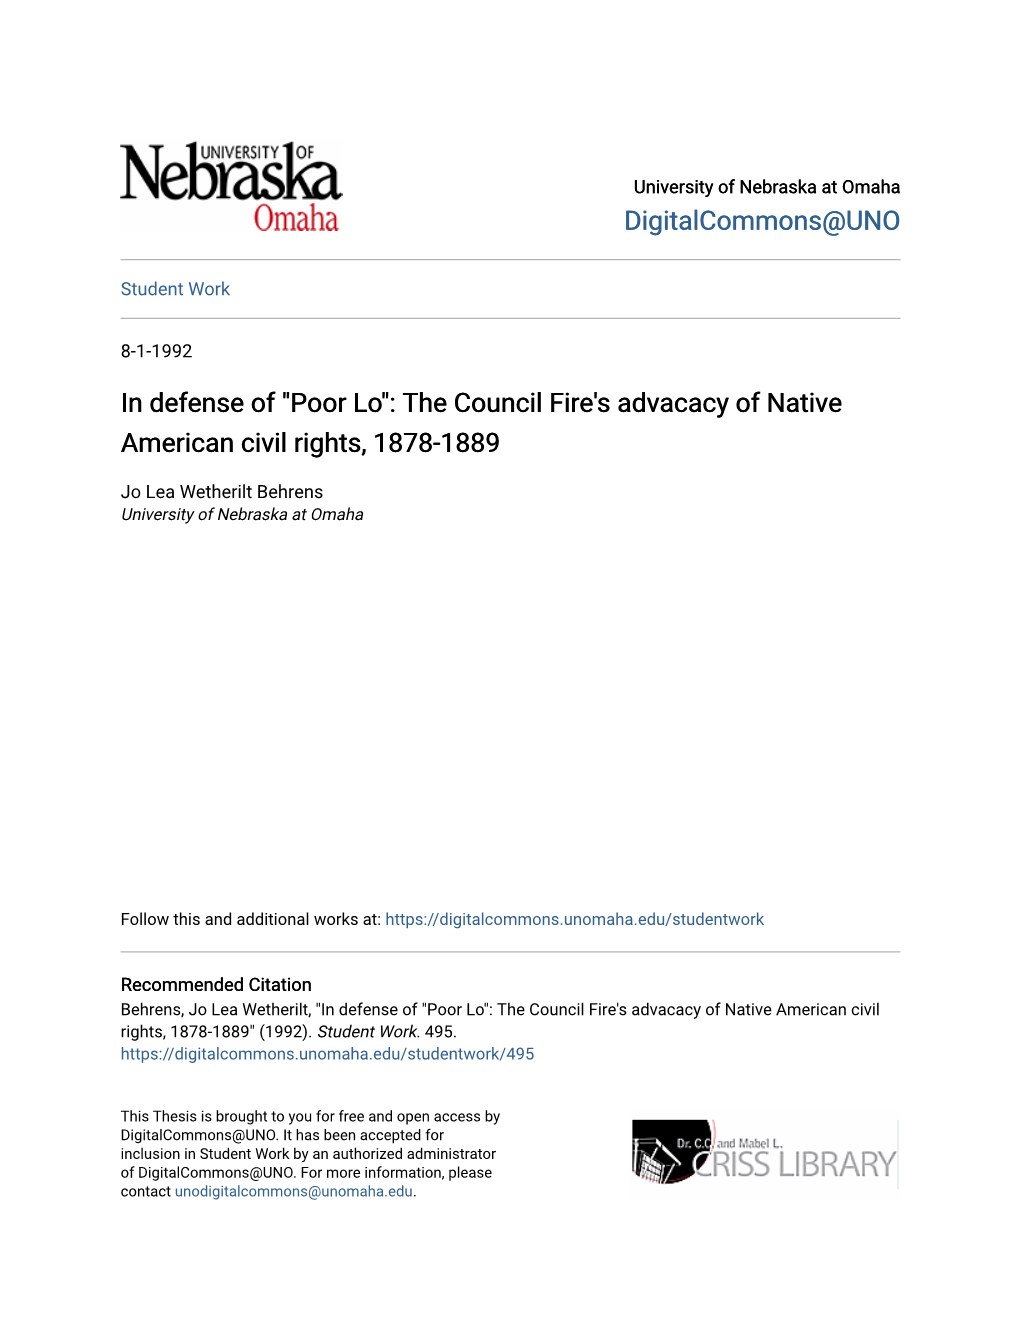 The Council Fire's Advacacy of Native American Civil Rights, 1878-1889